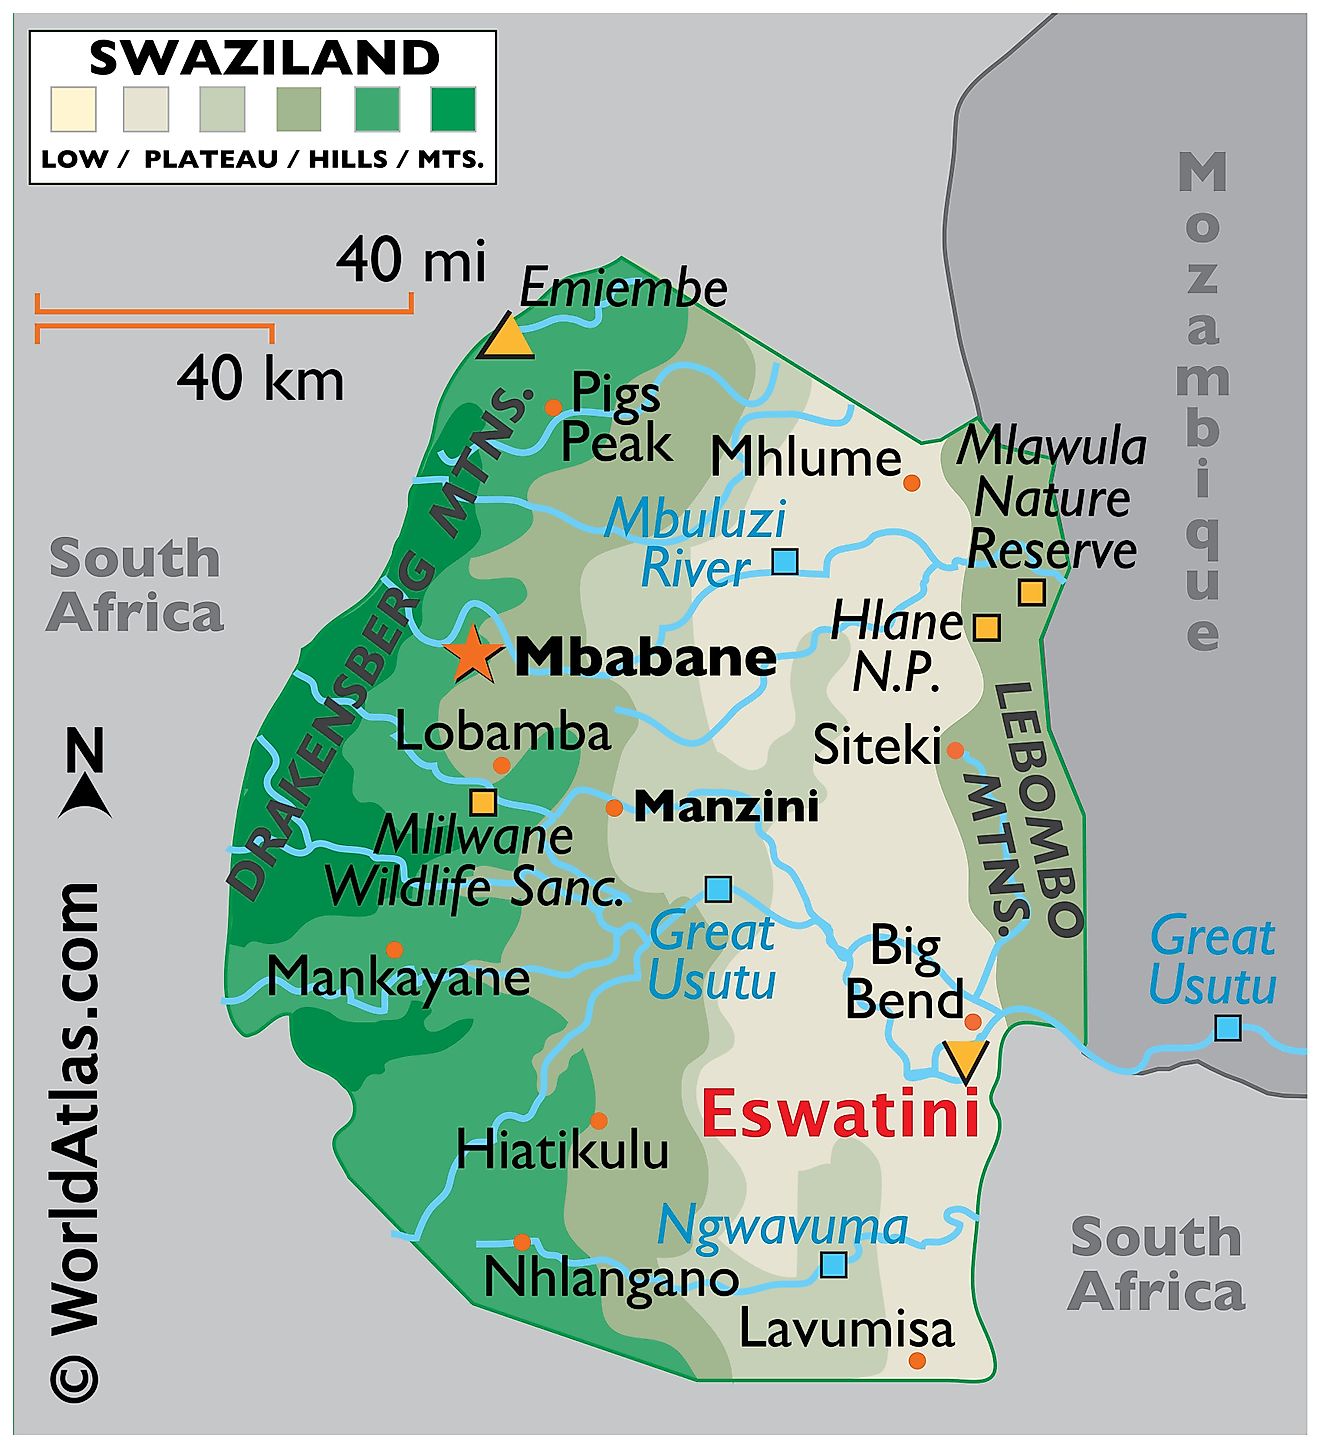 Physical Map of the Eswatini With State Boundaries. It shows the major physical features of Eswatini including mountain ranges, rivers, and lakes.